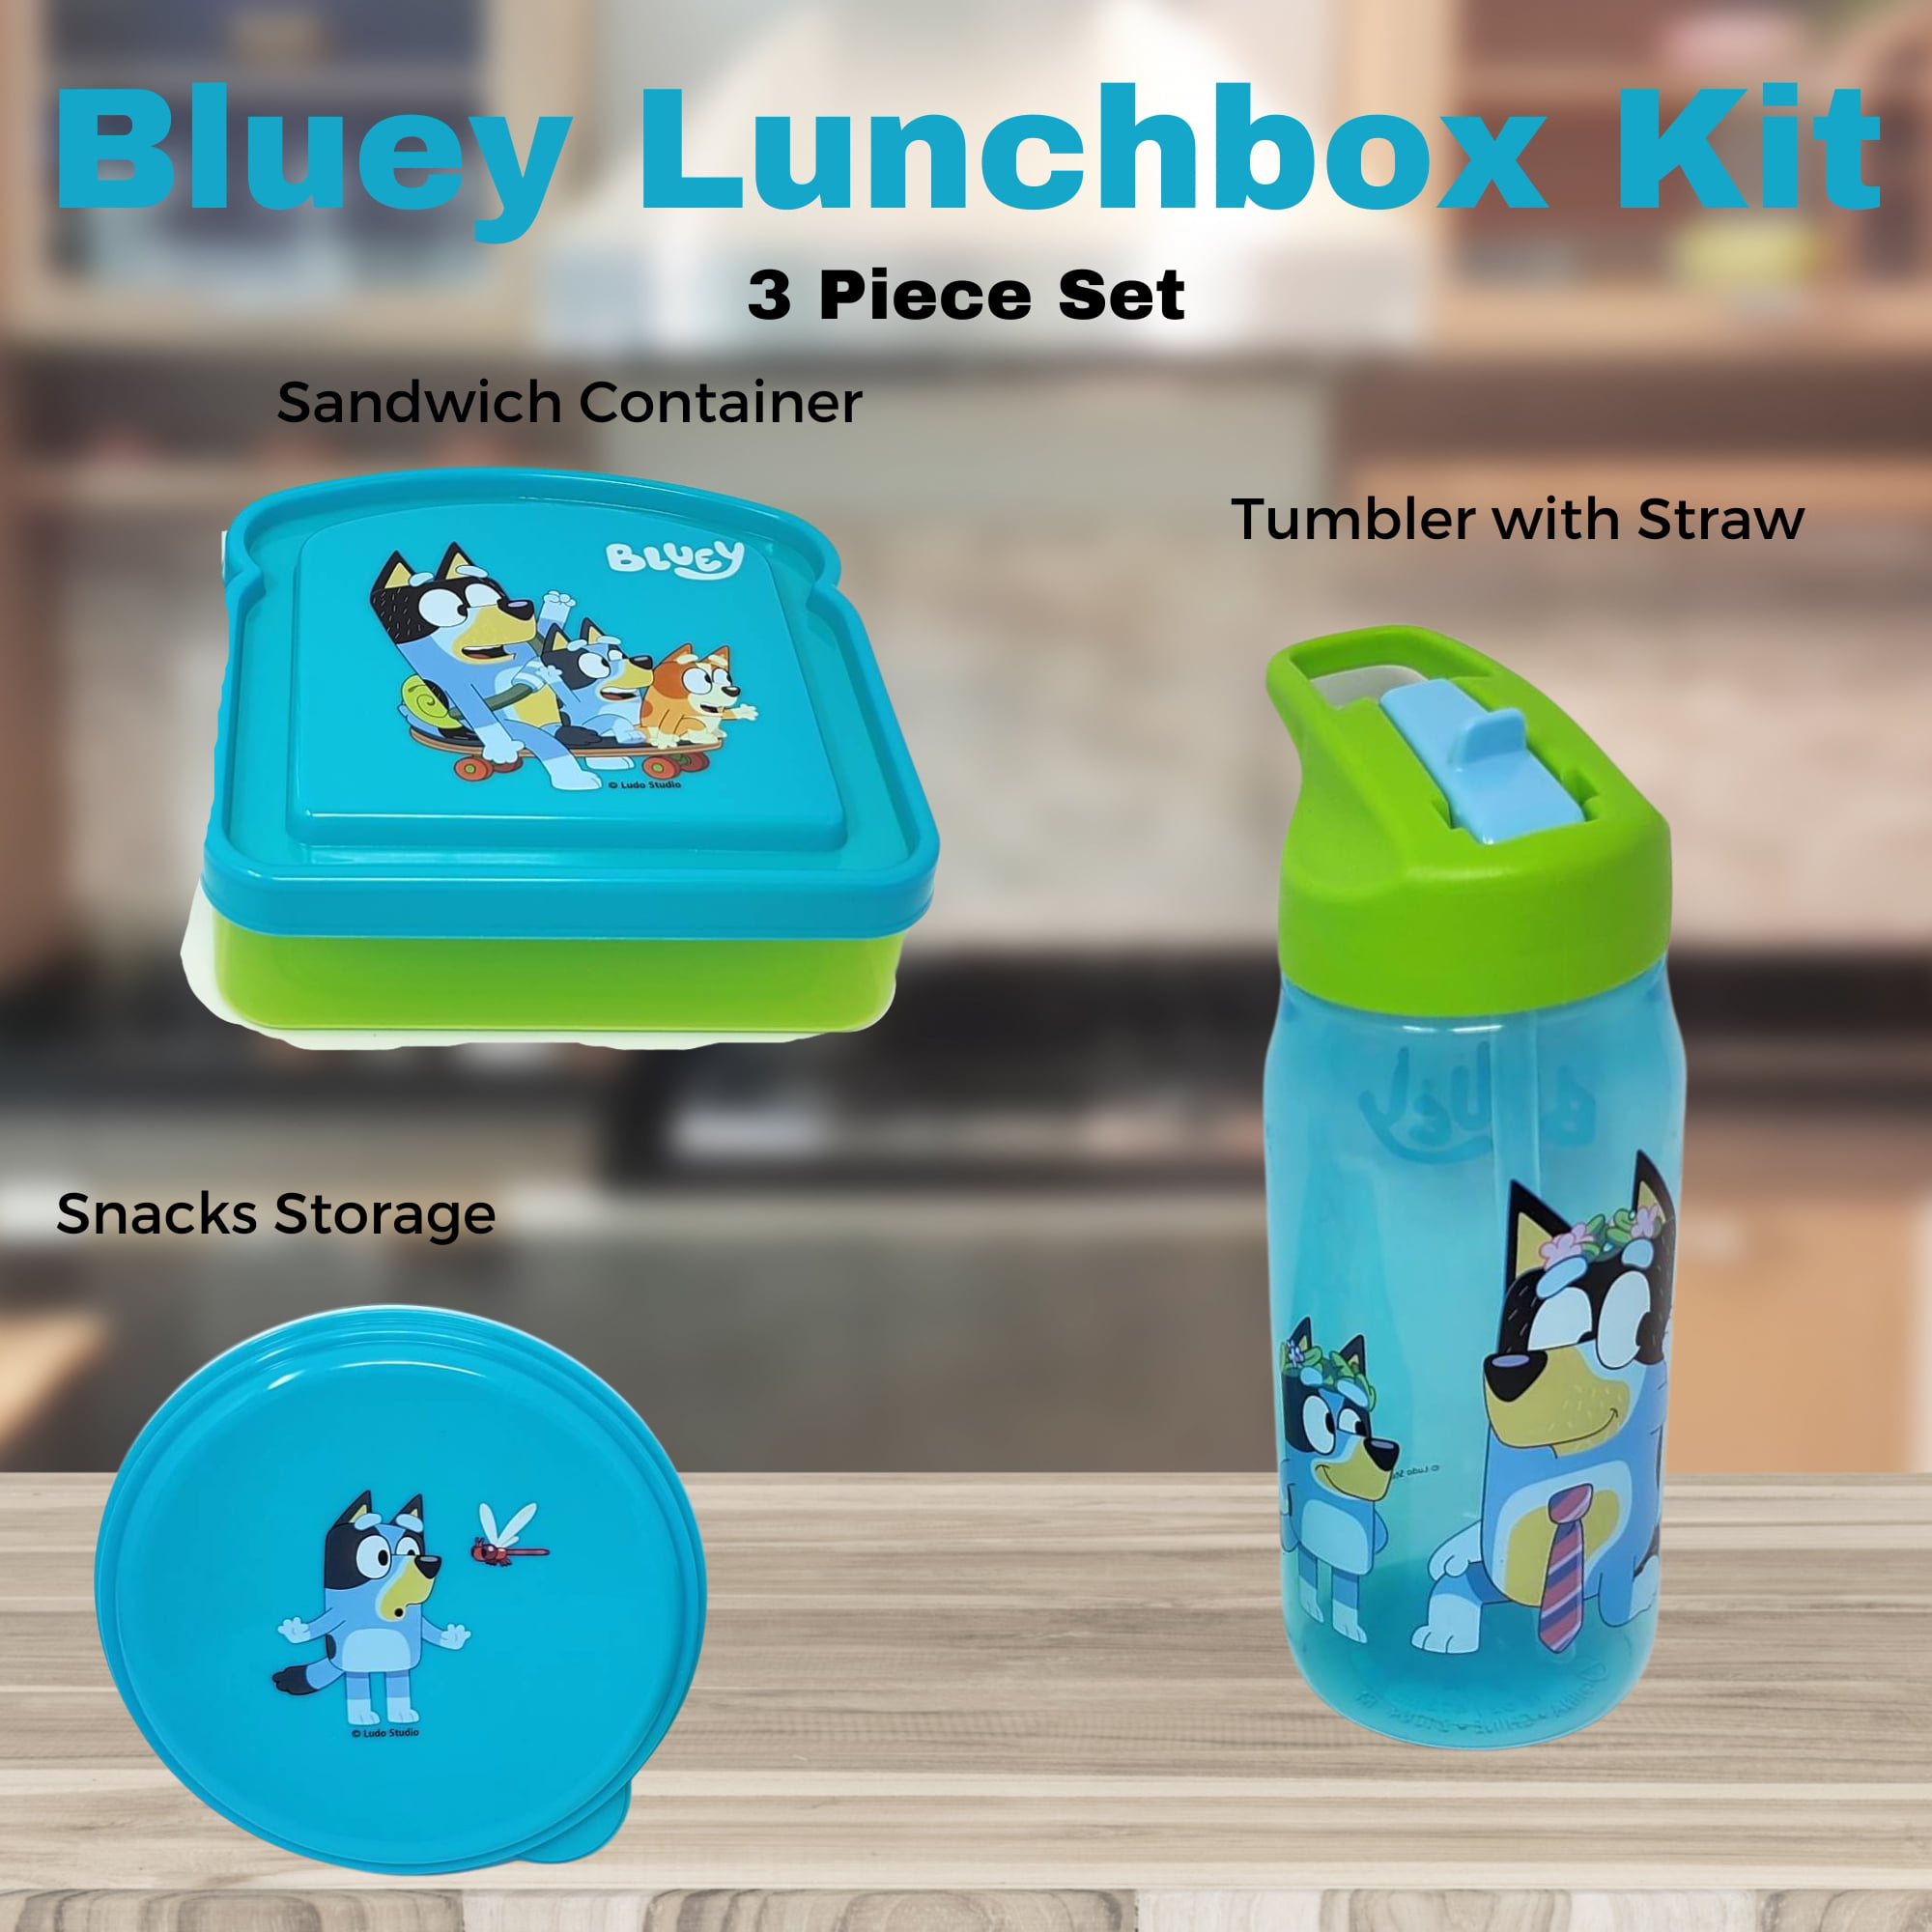 Bluey cookies for lunch boxes tomorrow : r/bluey